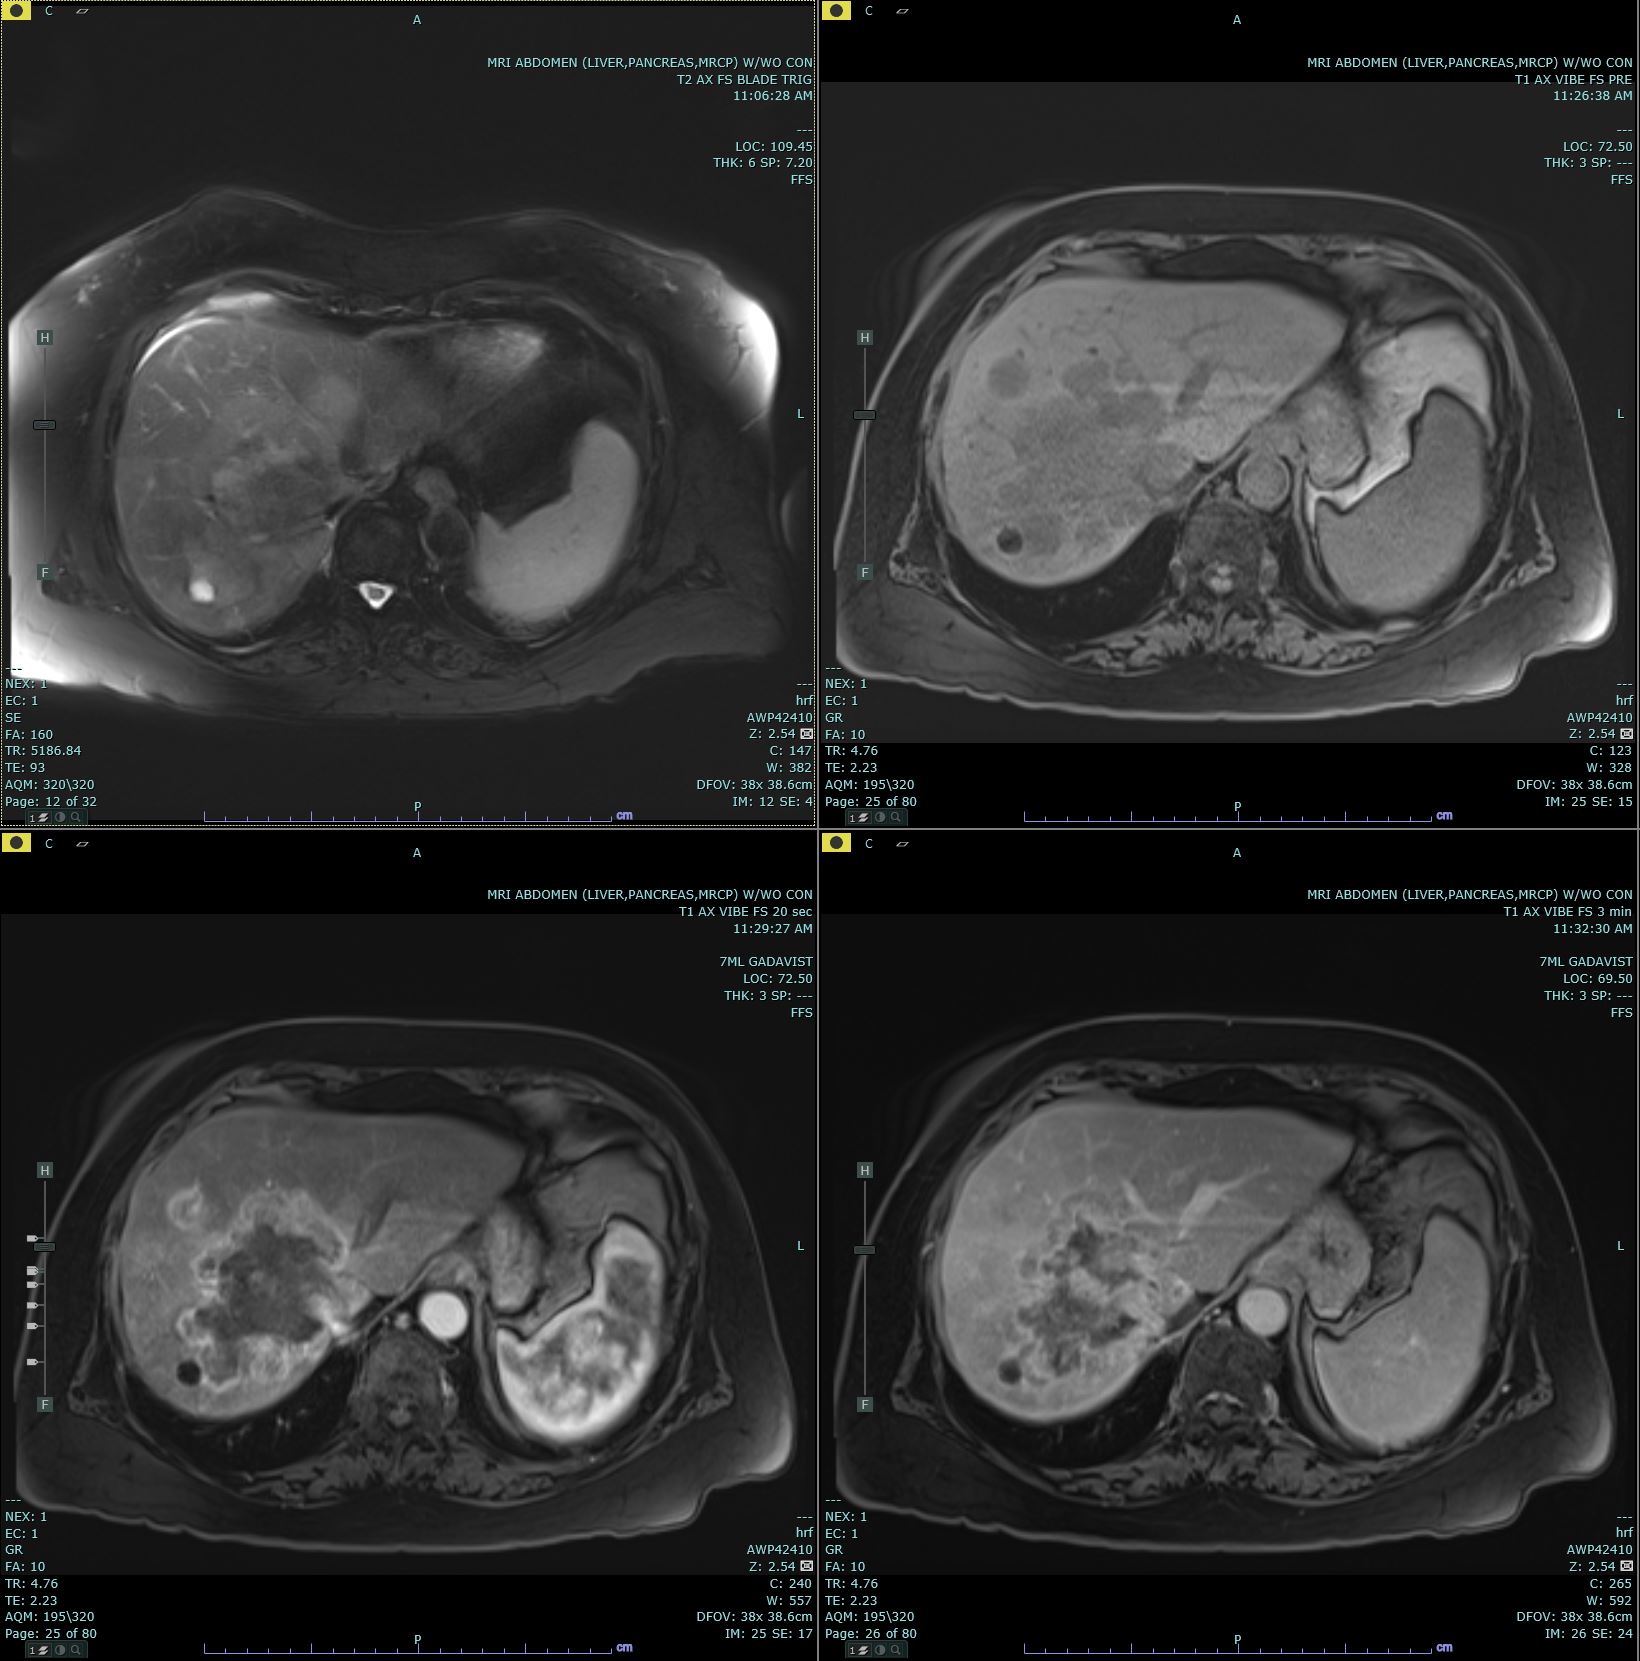 Axial T2 Haste, Pre T1 Vibe, and 20 second and 3 minute post contrast T1 Vibe images are submitted. There is a delayed enhancing mass in the right hepatic lobe which is biopsy proven to be cholangiocarcinoma. This mass has increased T2 signal in comparison to the background liver parenchyma with decreased T1 signal also identified. 